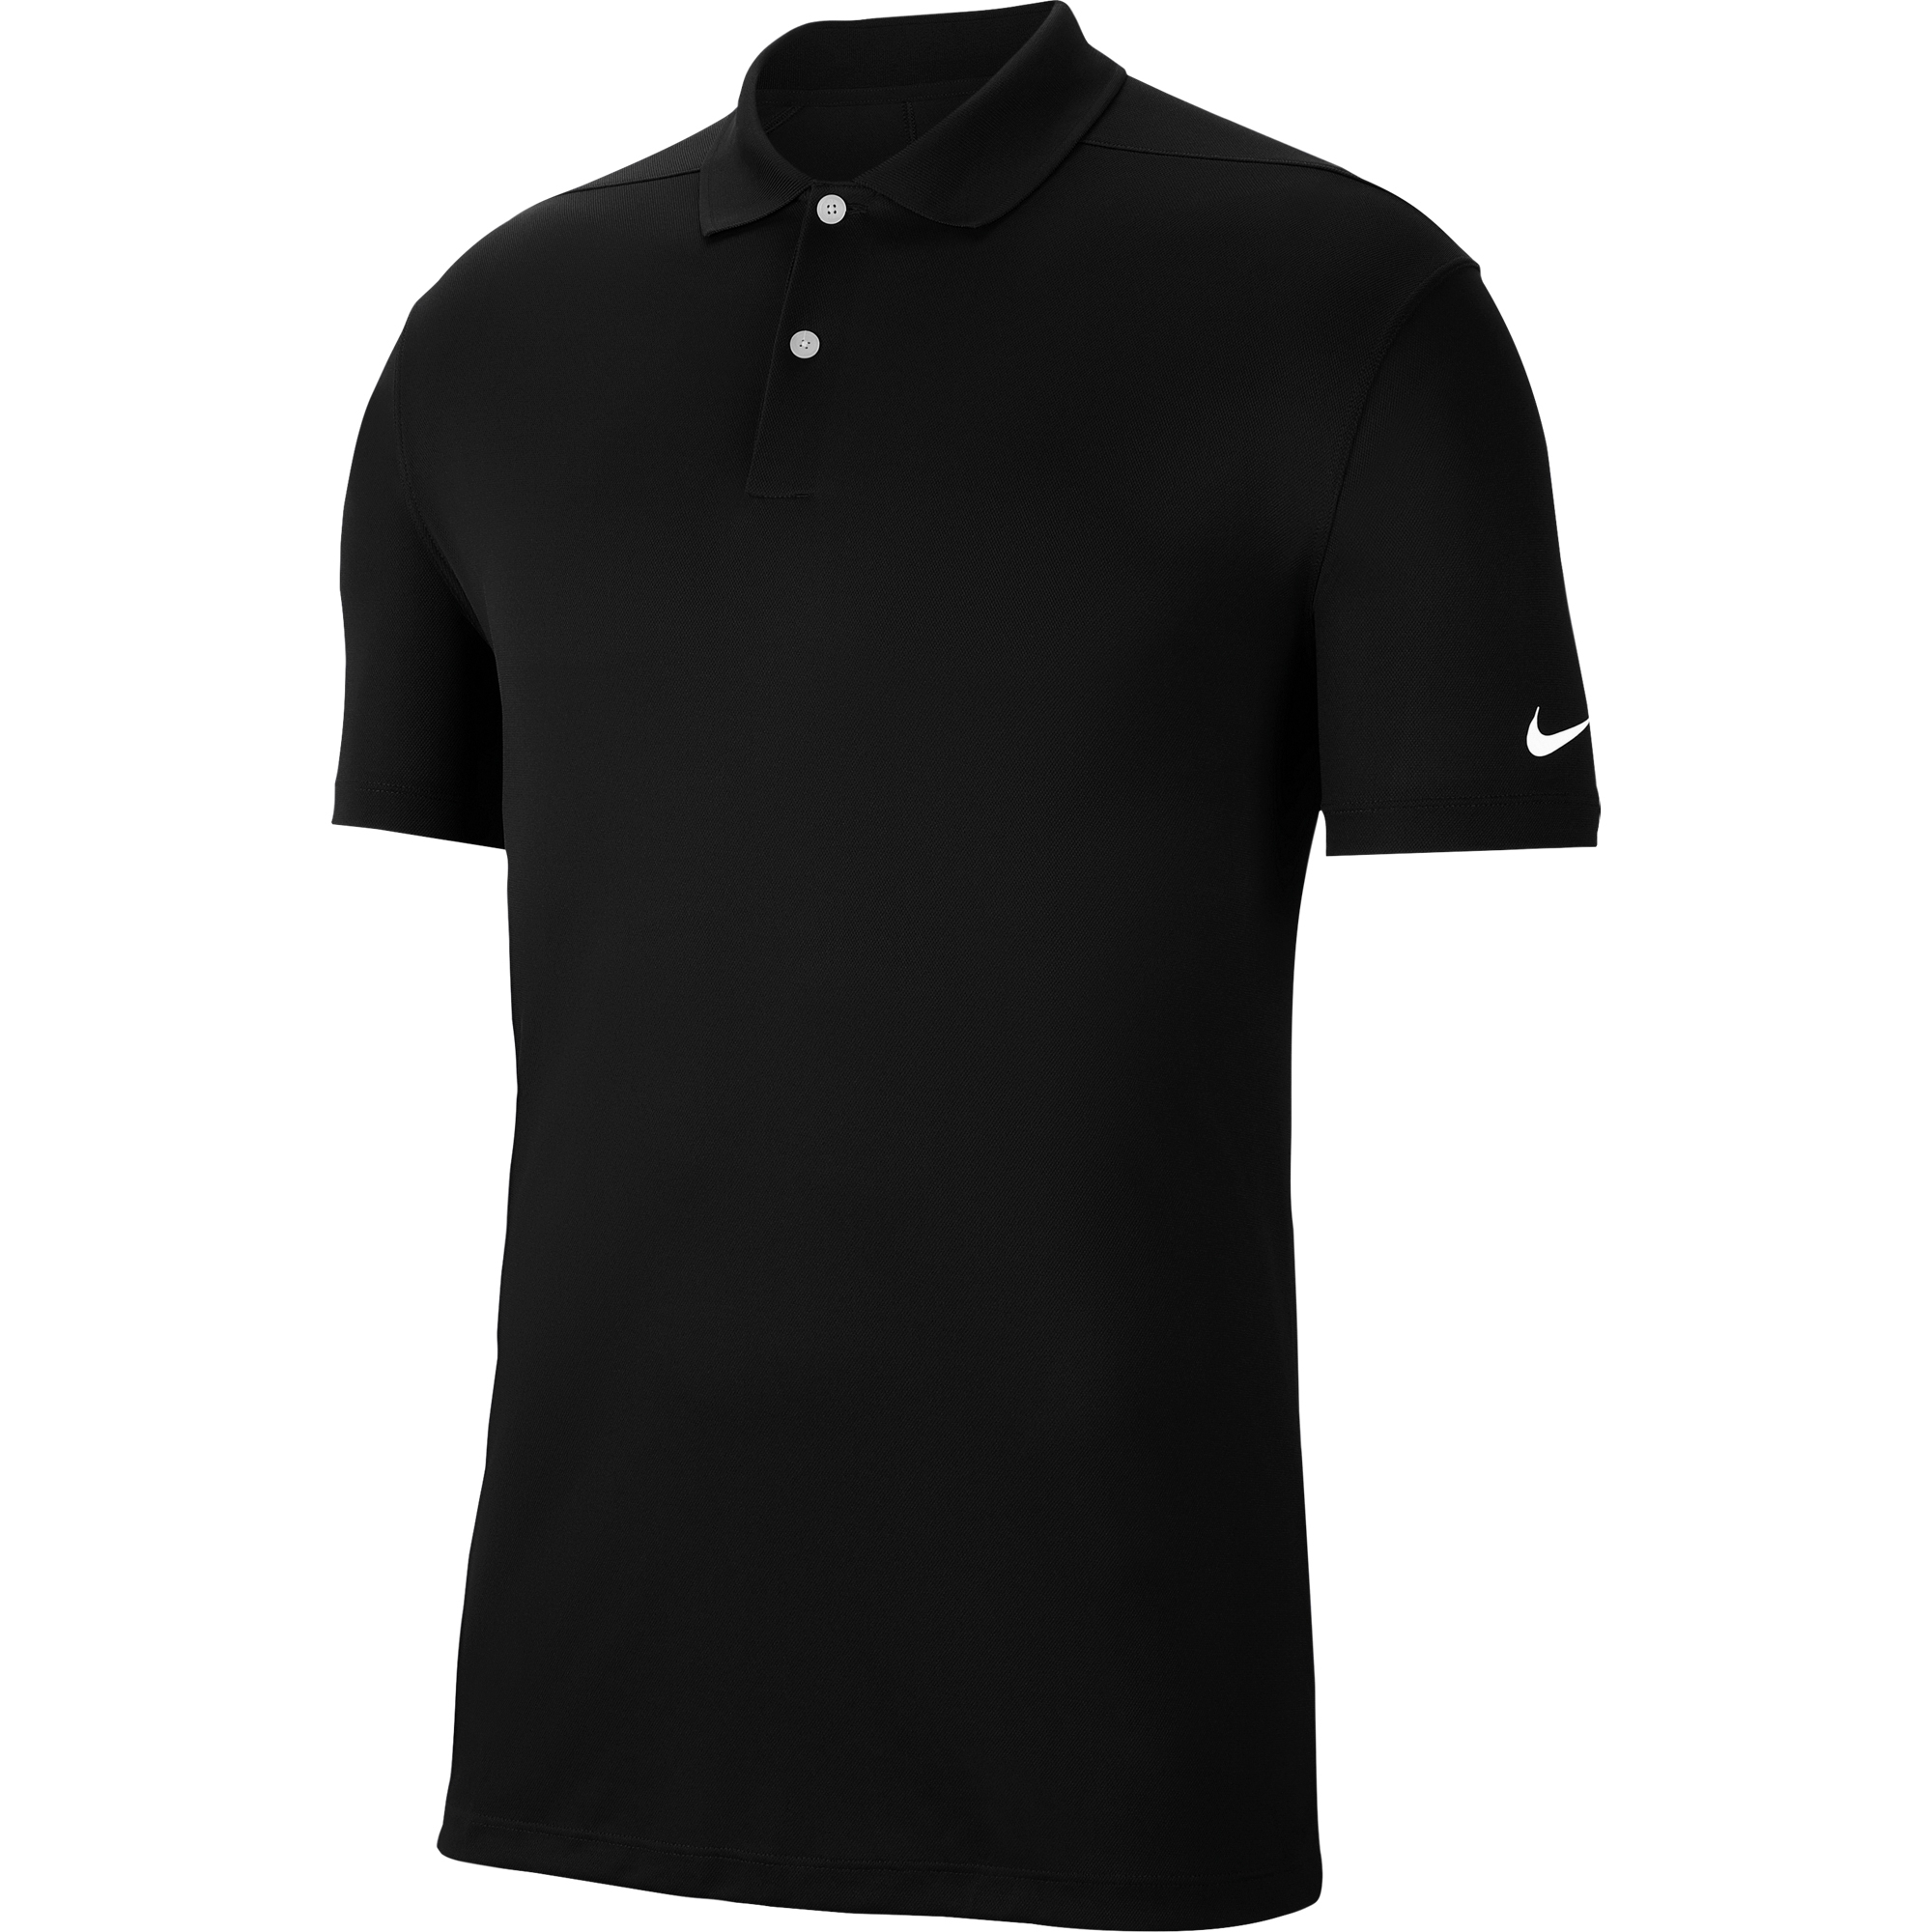 Nike Mens Dry Fit Solid Victory Golf Polo Shirt S- Chest 35-37.5